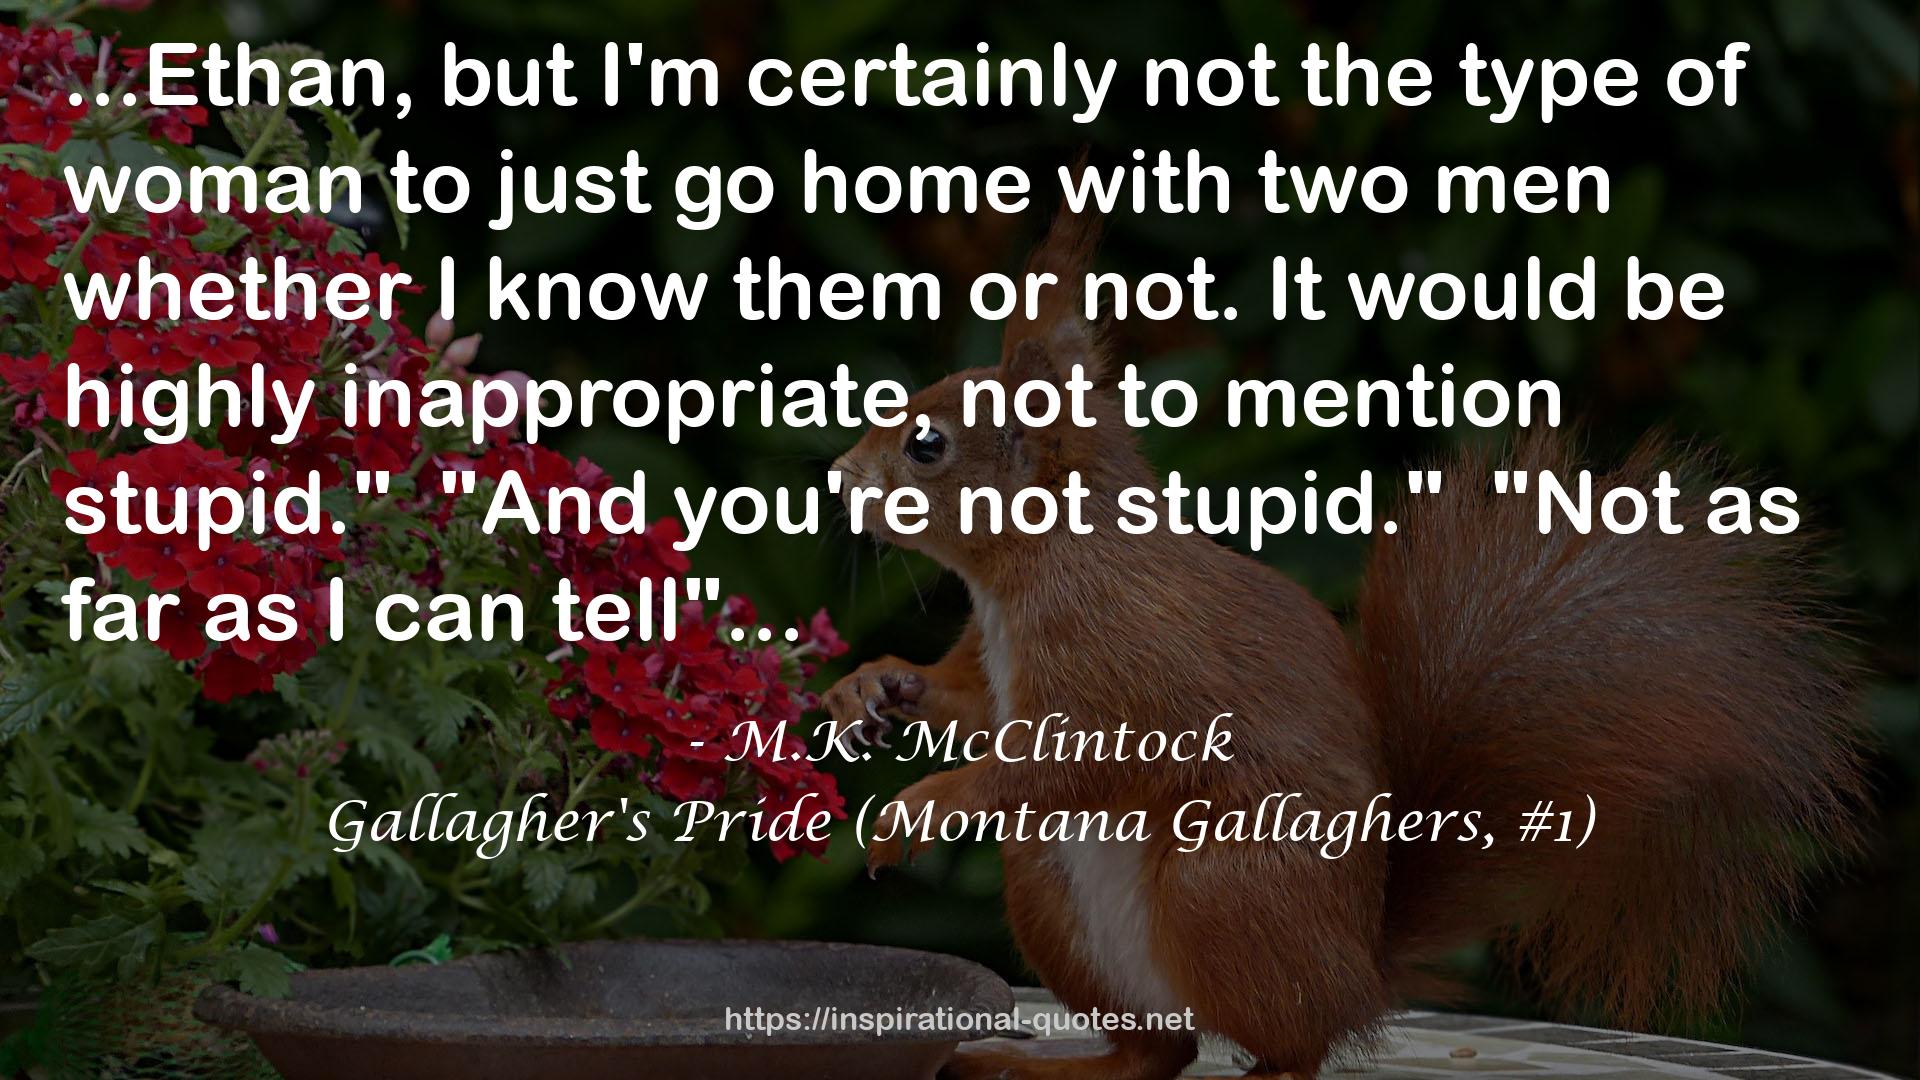 Gallagher's Pride (Montana Gallaghers, #1) QUOTES